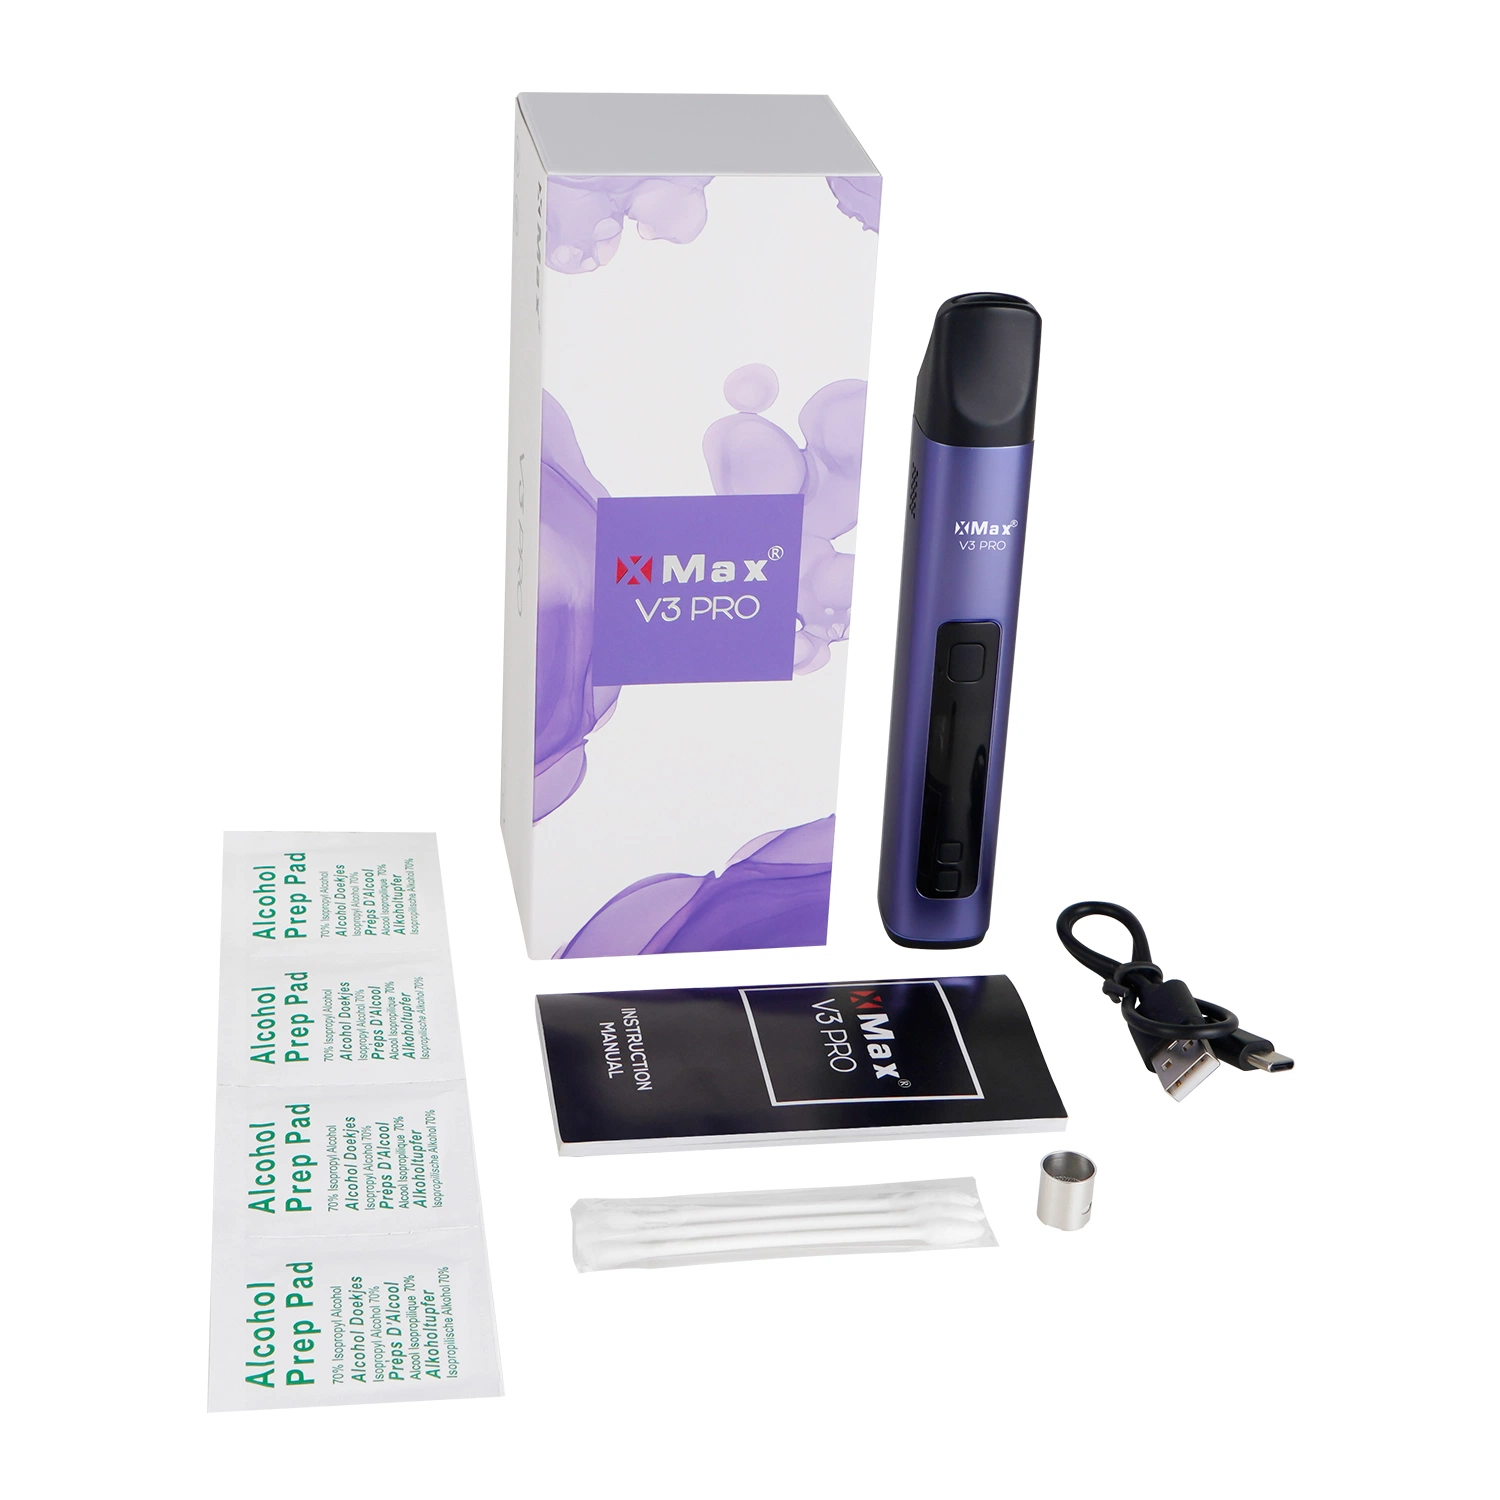 Topgreen New Herb Tasty Convection Technology Vape Pen Smoke Manufacture vape Starter Kits Xmax V3 PRO Latest Products in Market